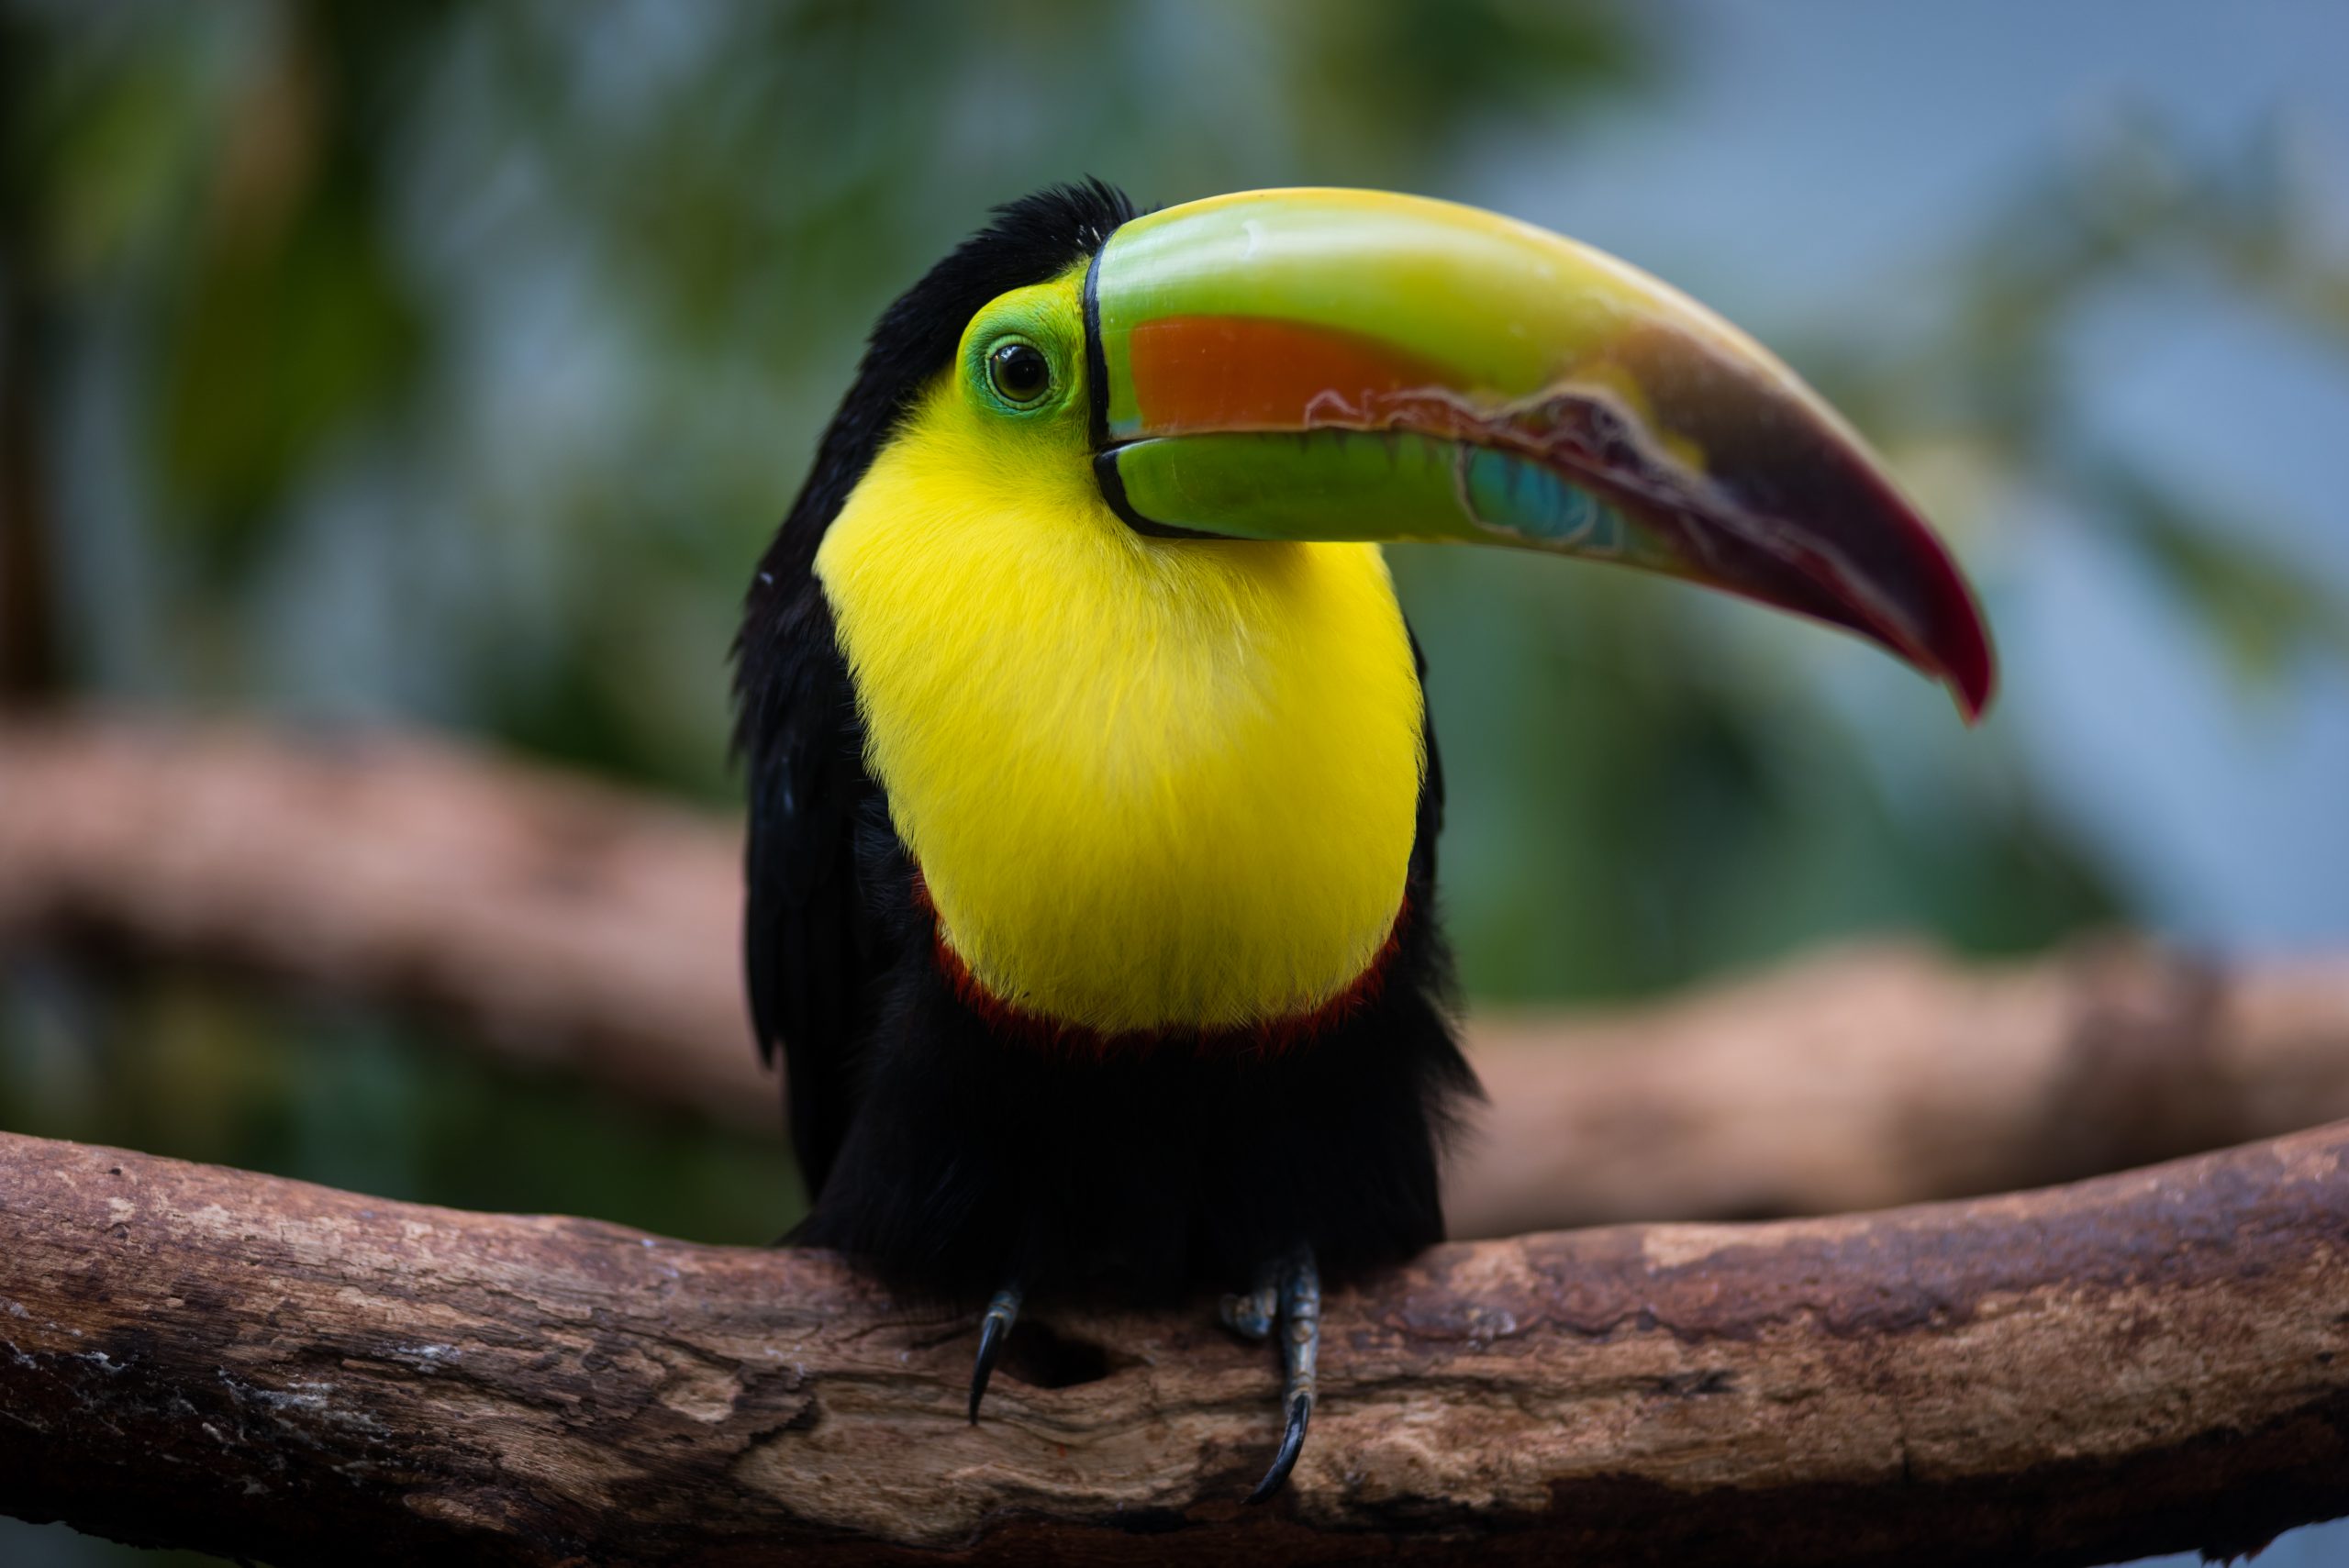 A Keel-billed Toucan perched on a branch